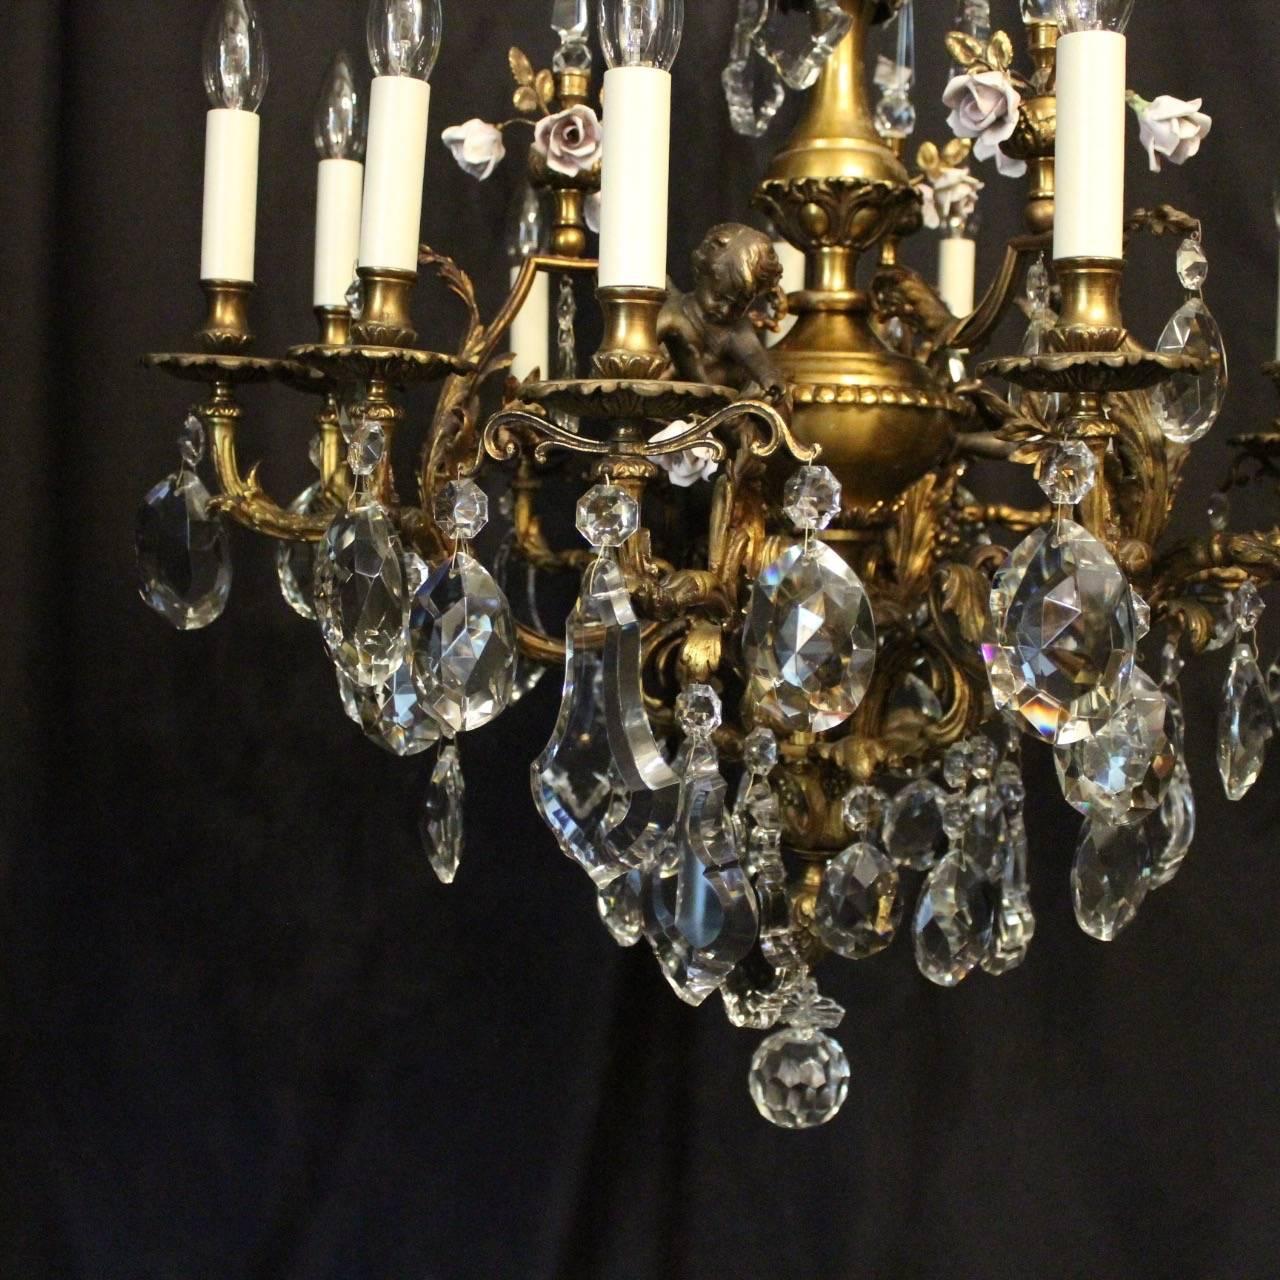 A French gilded bronze and crystal twelve-light cherub antique chandelier, the ornate acanthus leaf scrolling arms with circular bobeche drip pans and bulbous candle sconces, issuing from an foliated interior with ornate bronze cherubs and porcelain